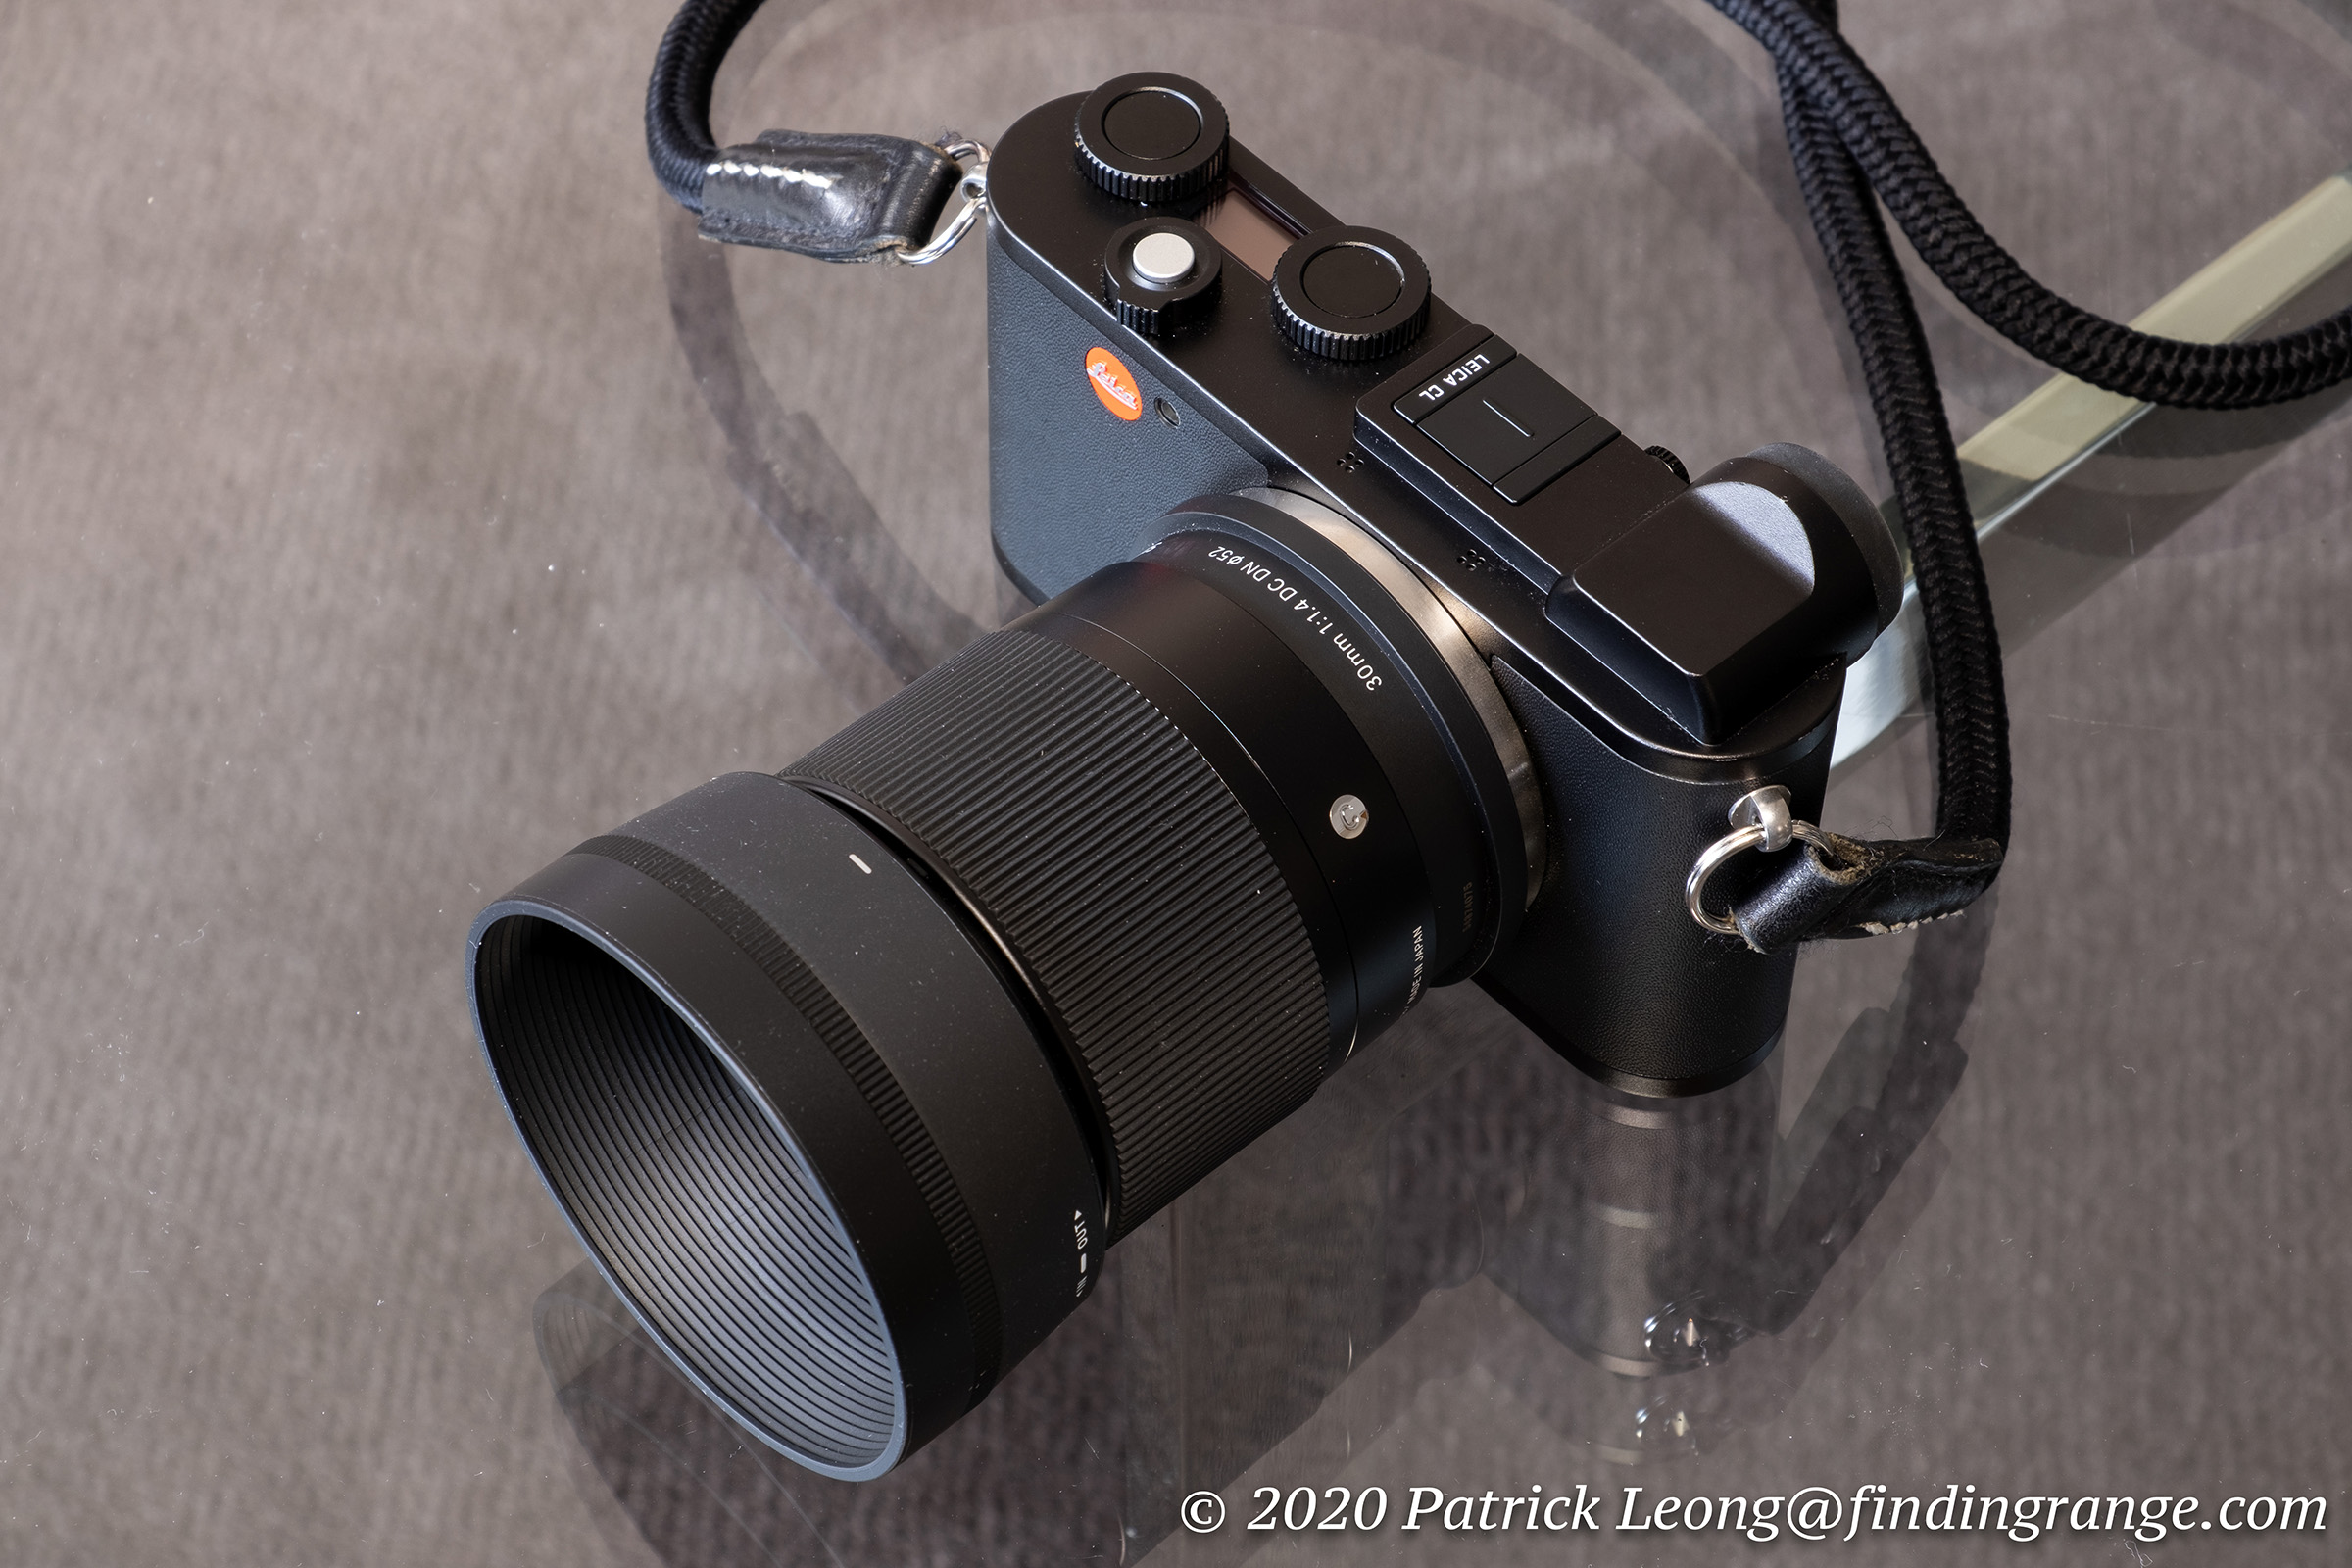 Sigma 30mm f1.4 DC DN Contemporary Lens First Impressions L Mount